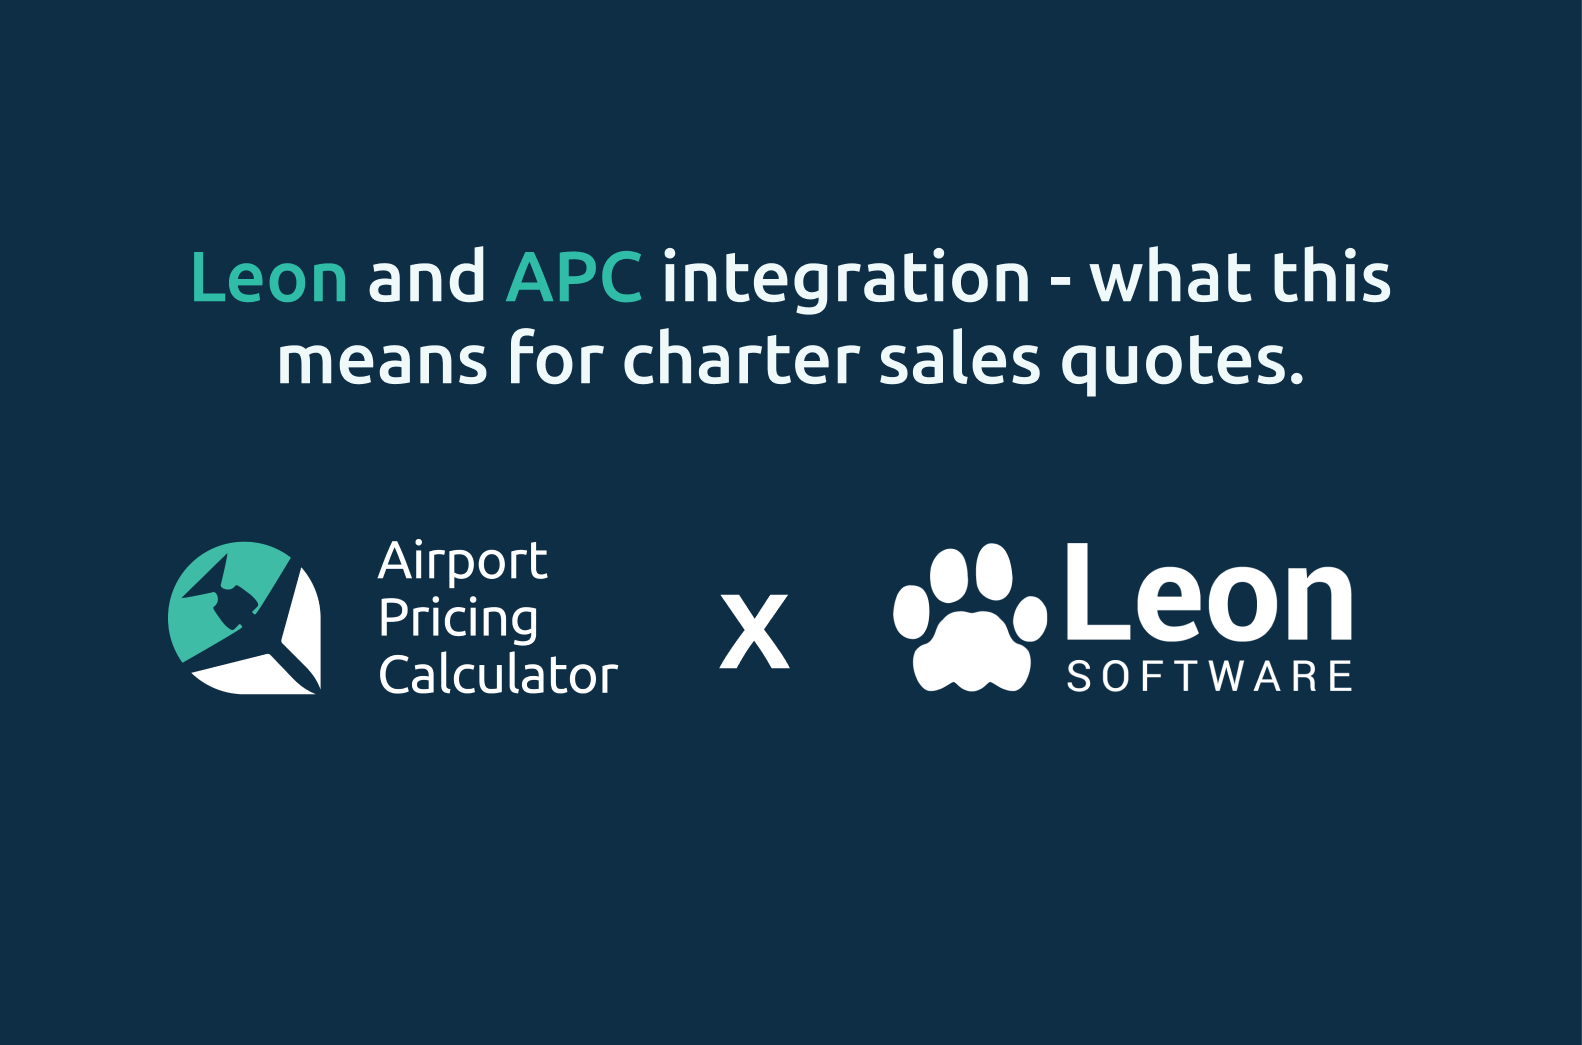 Leon and APC integration – what this means for charter sales quotes.